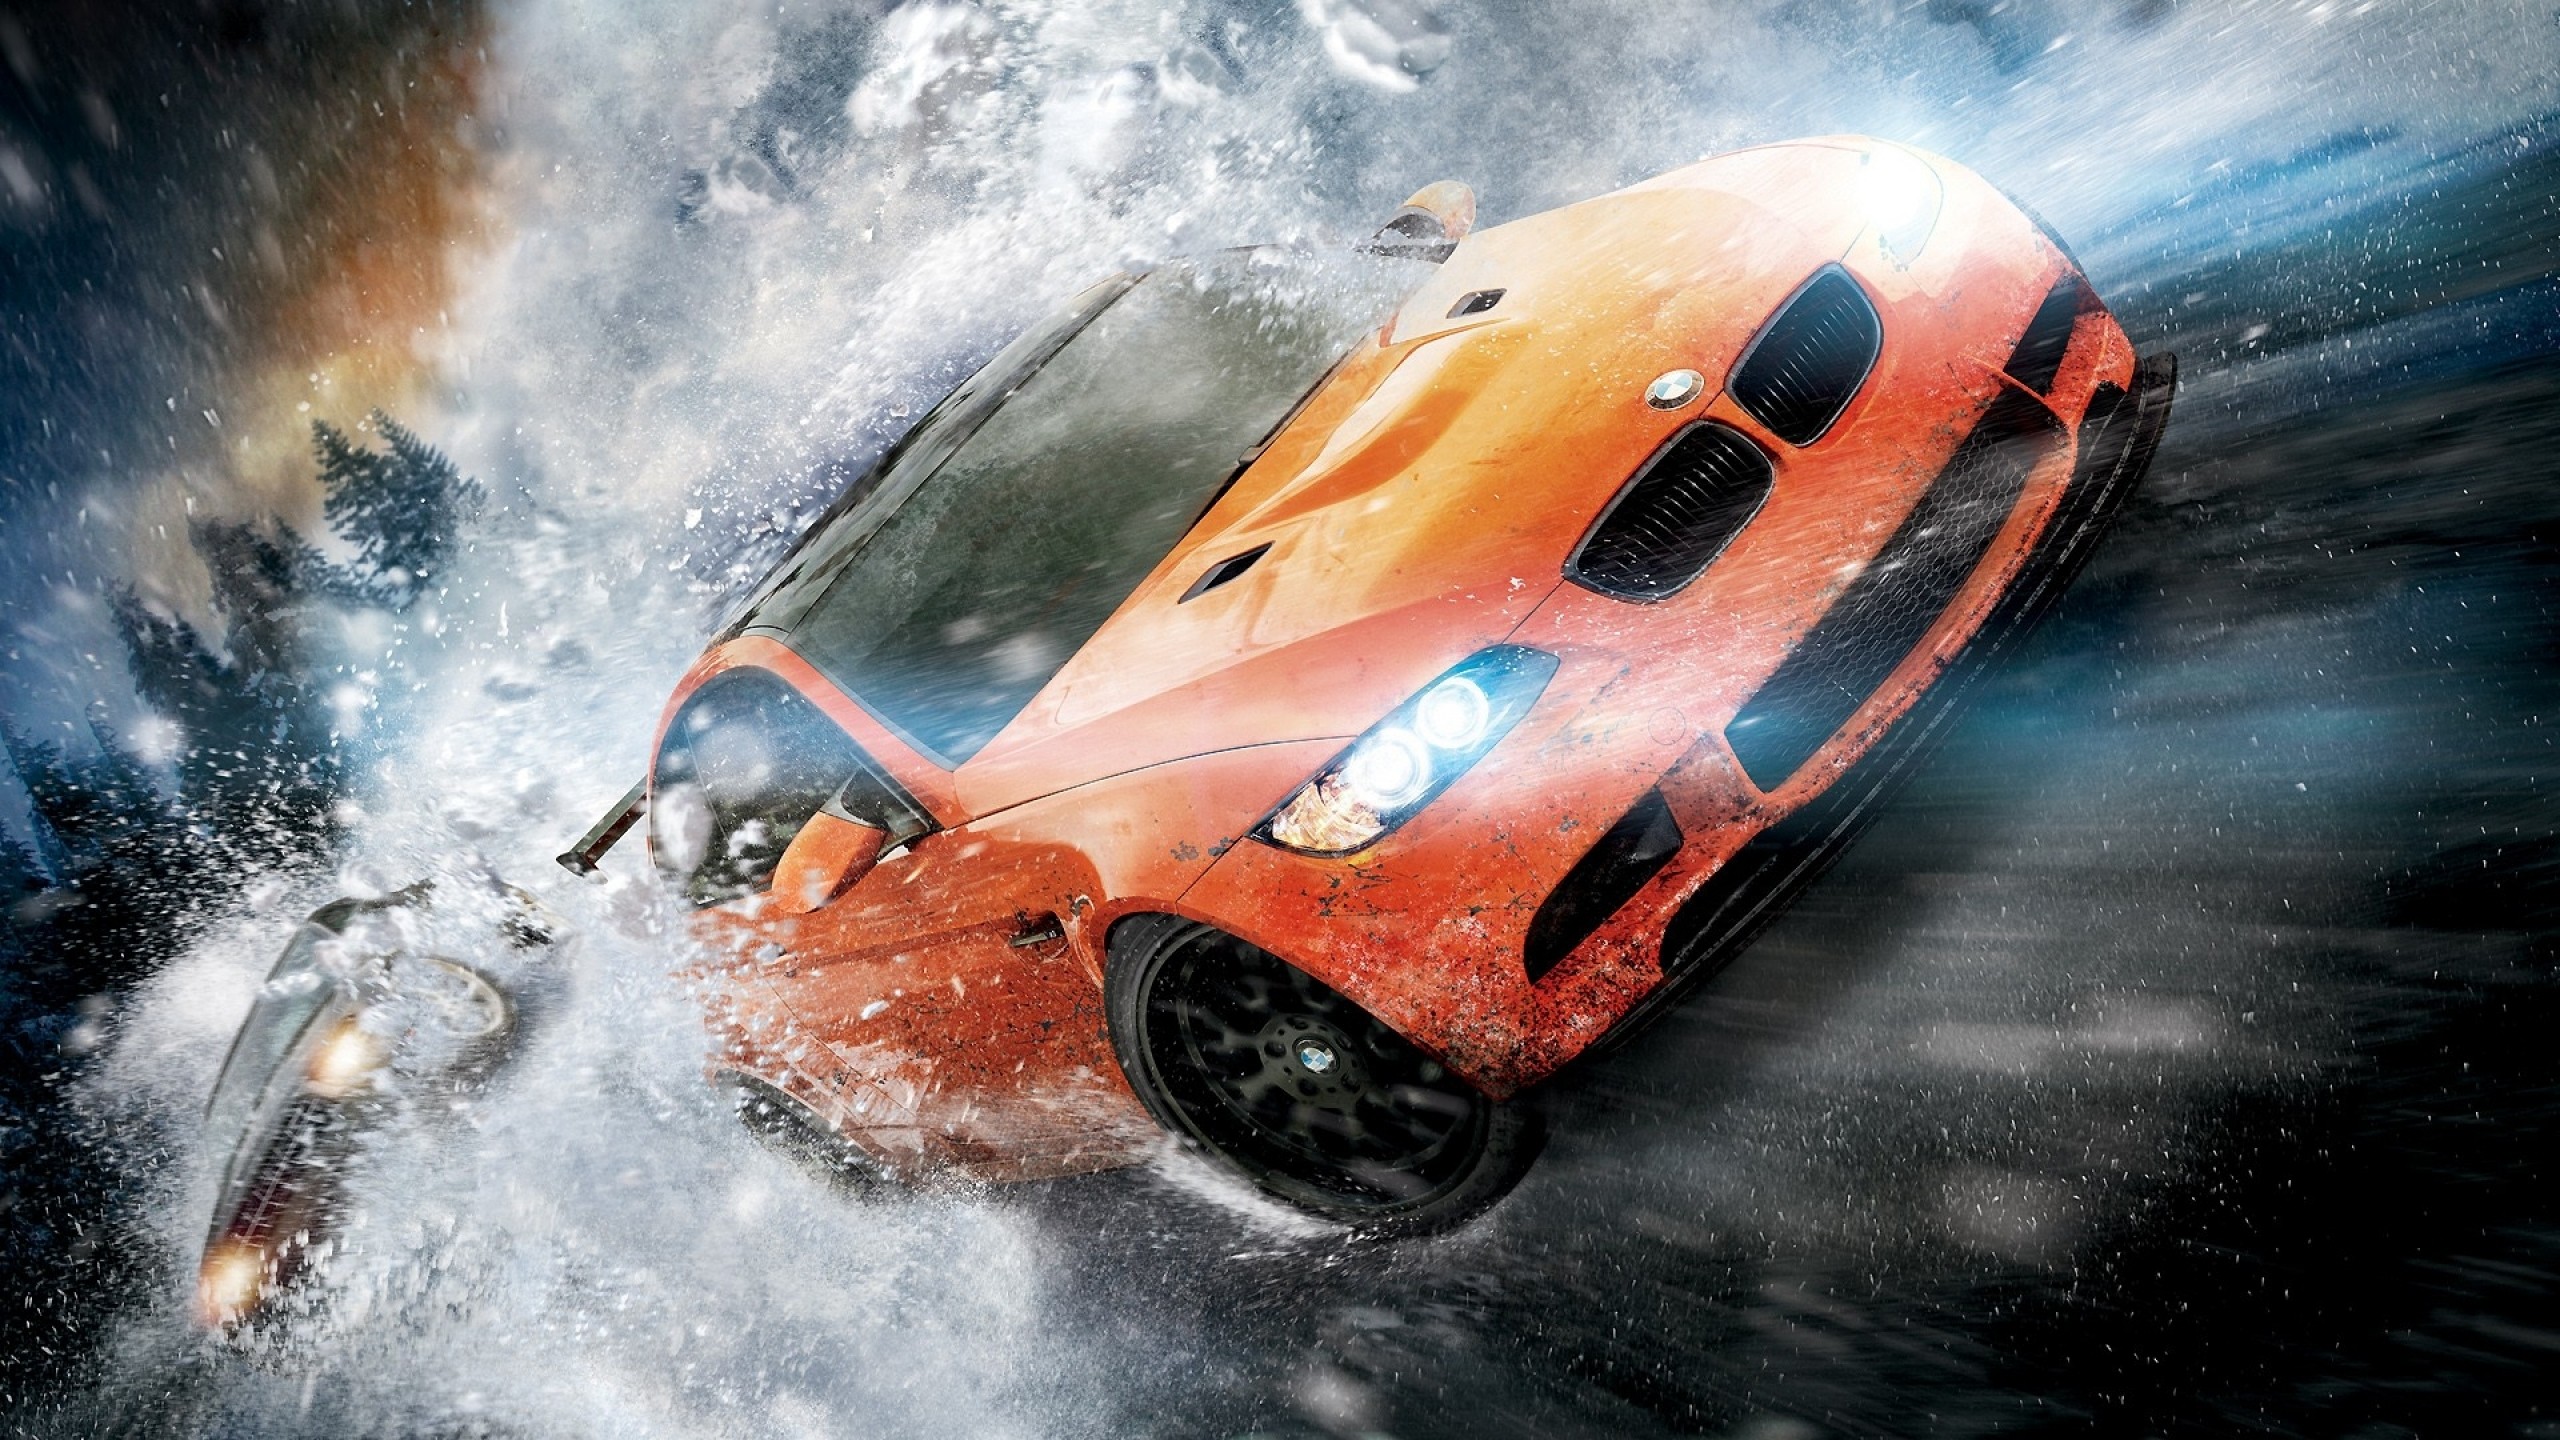 bmw, Cars, Orange, Need, For, Speed, Gaming, Definition, Need, For, Speed, The, Run, Games Wallpaper